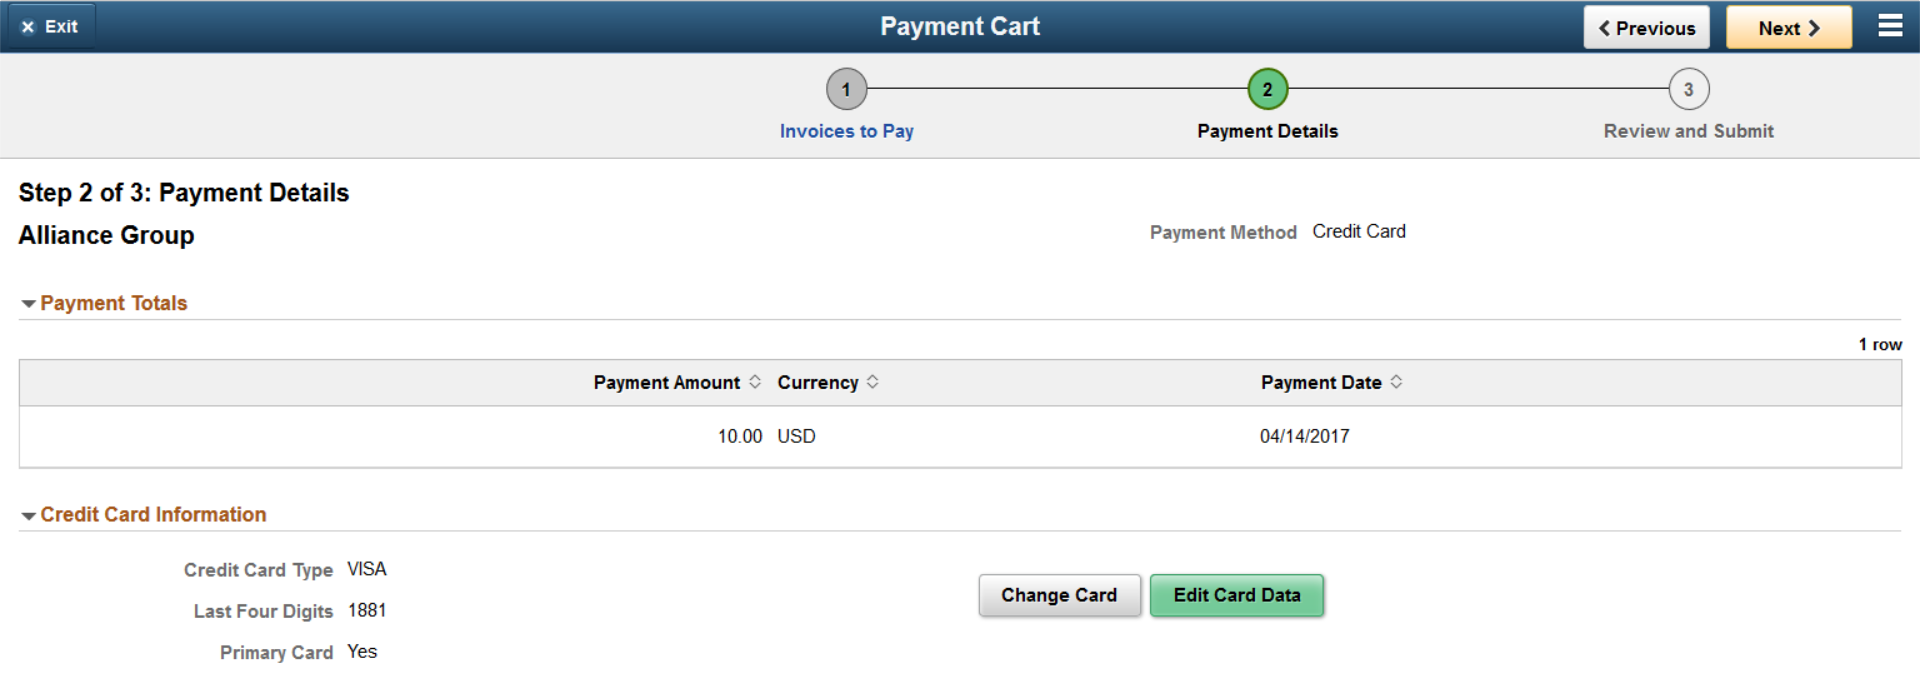 Step 2 of 3: Payment Details for a credit card payment (LFF)